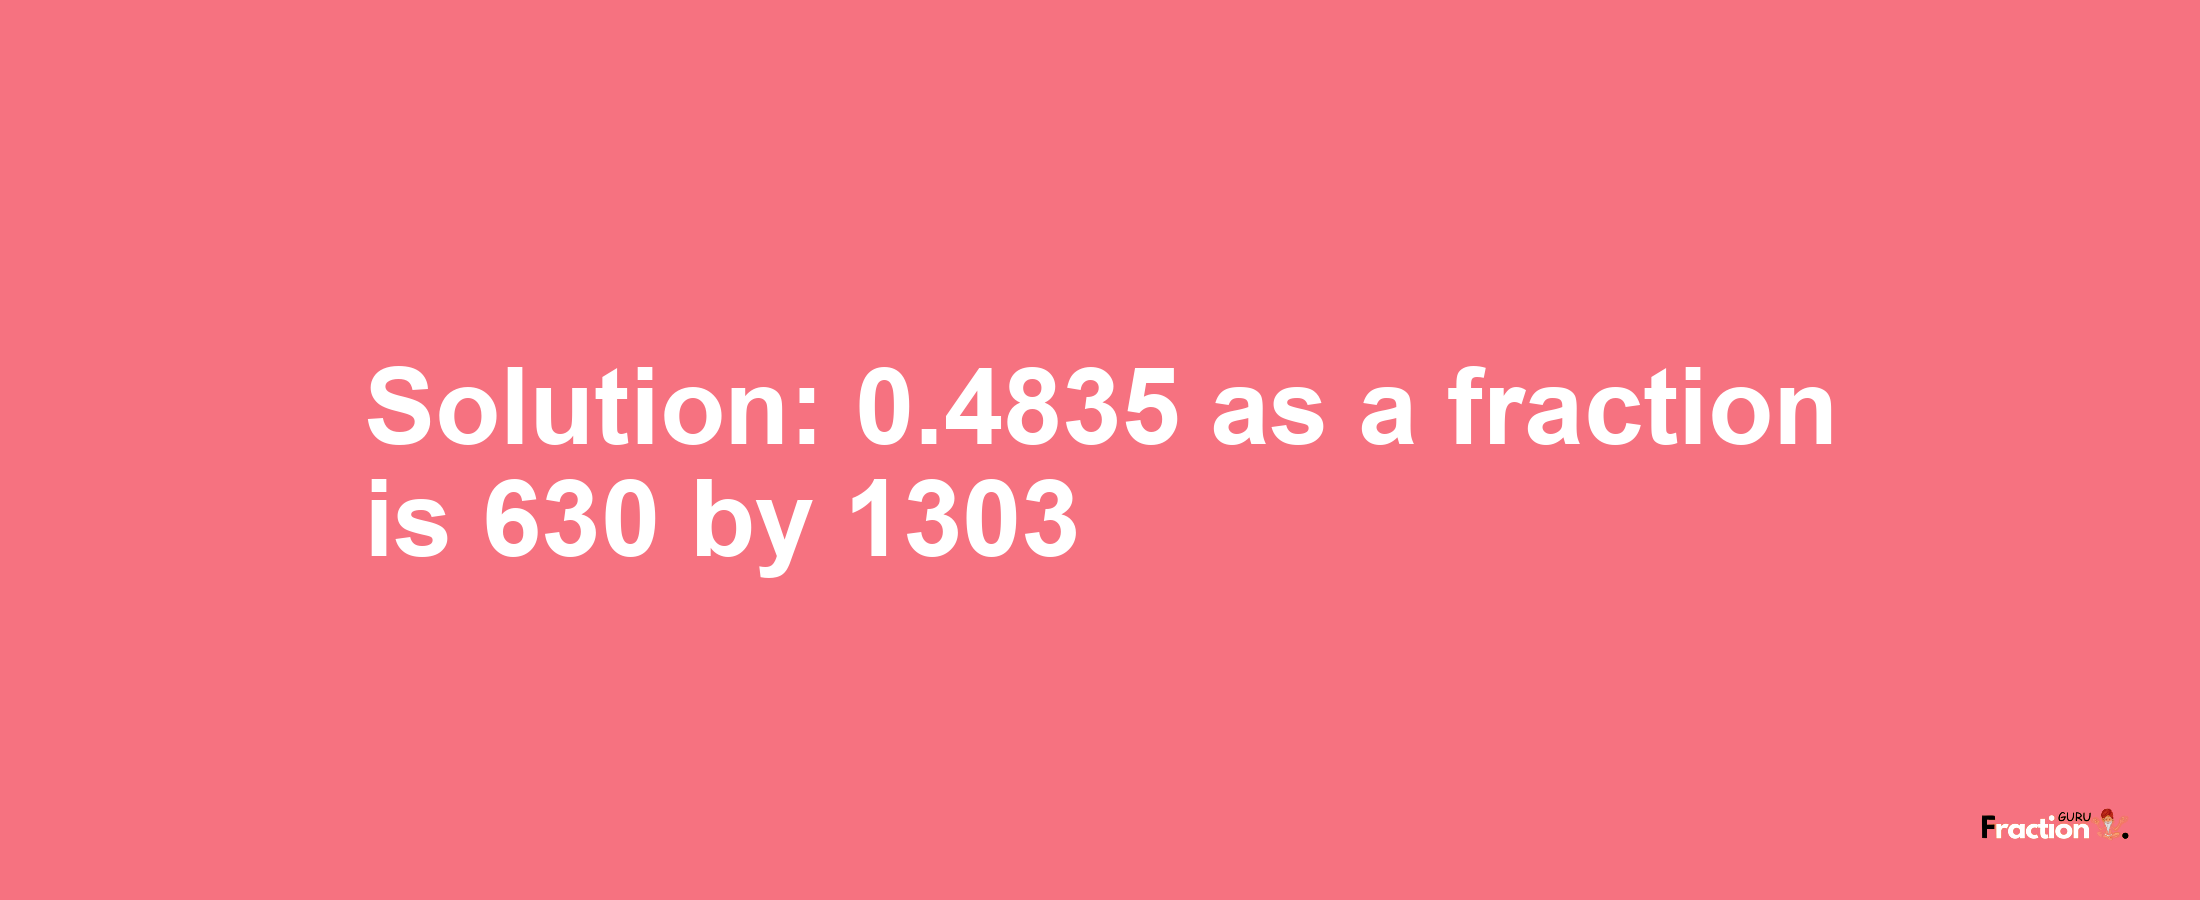 Solution:0.4835 as a fraction is 630/1303